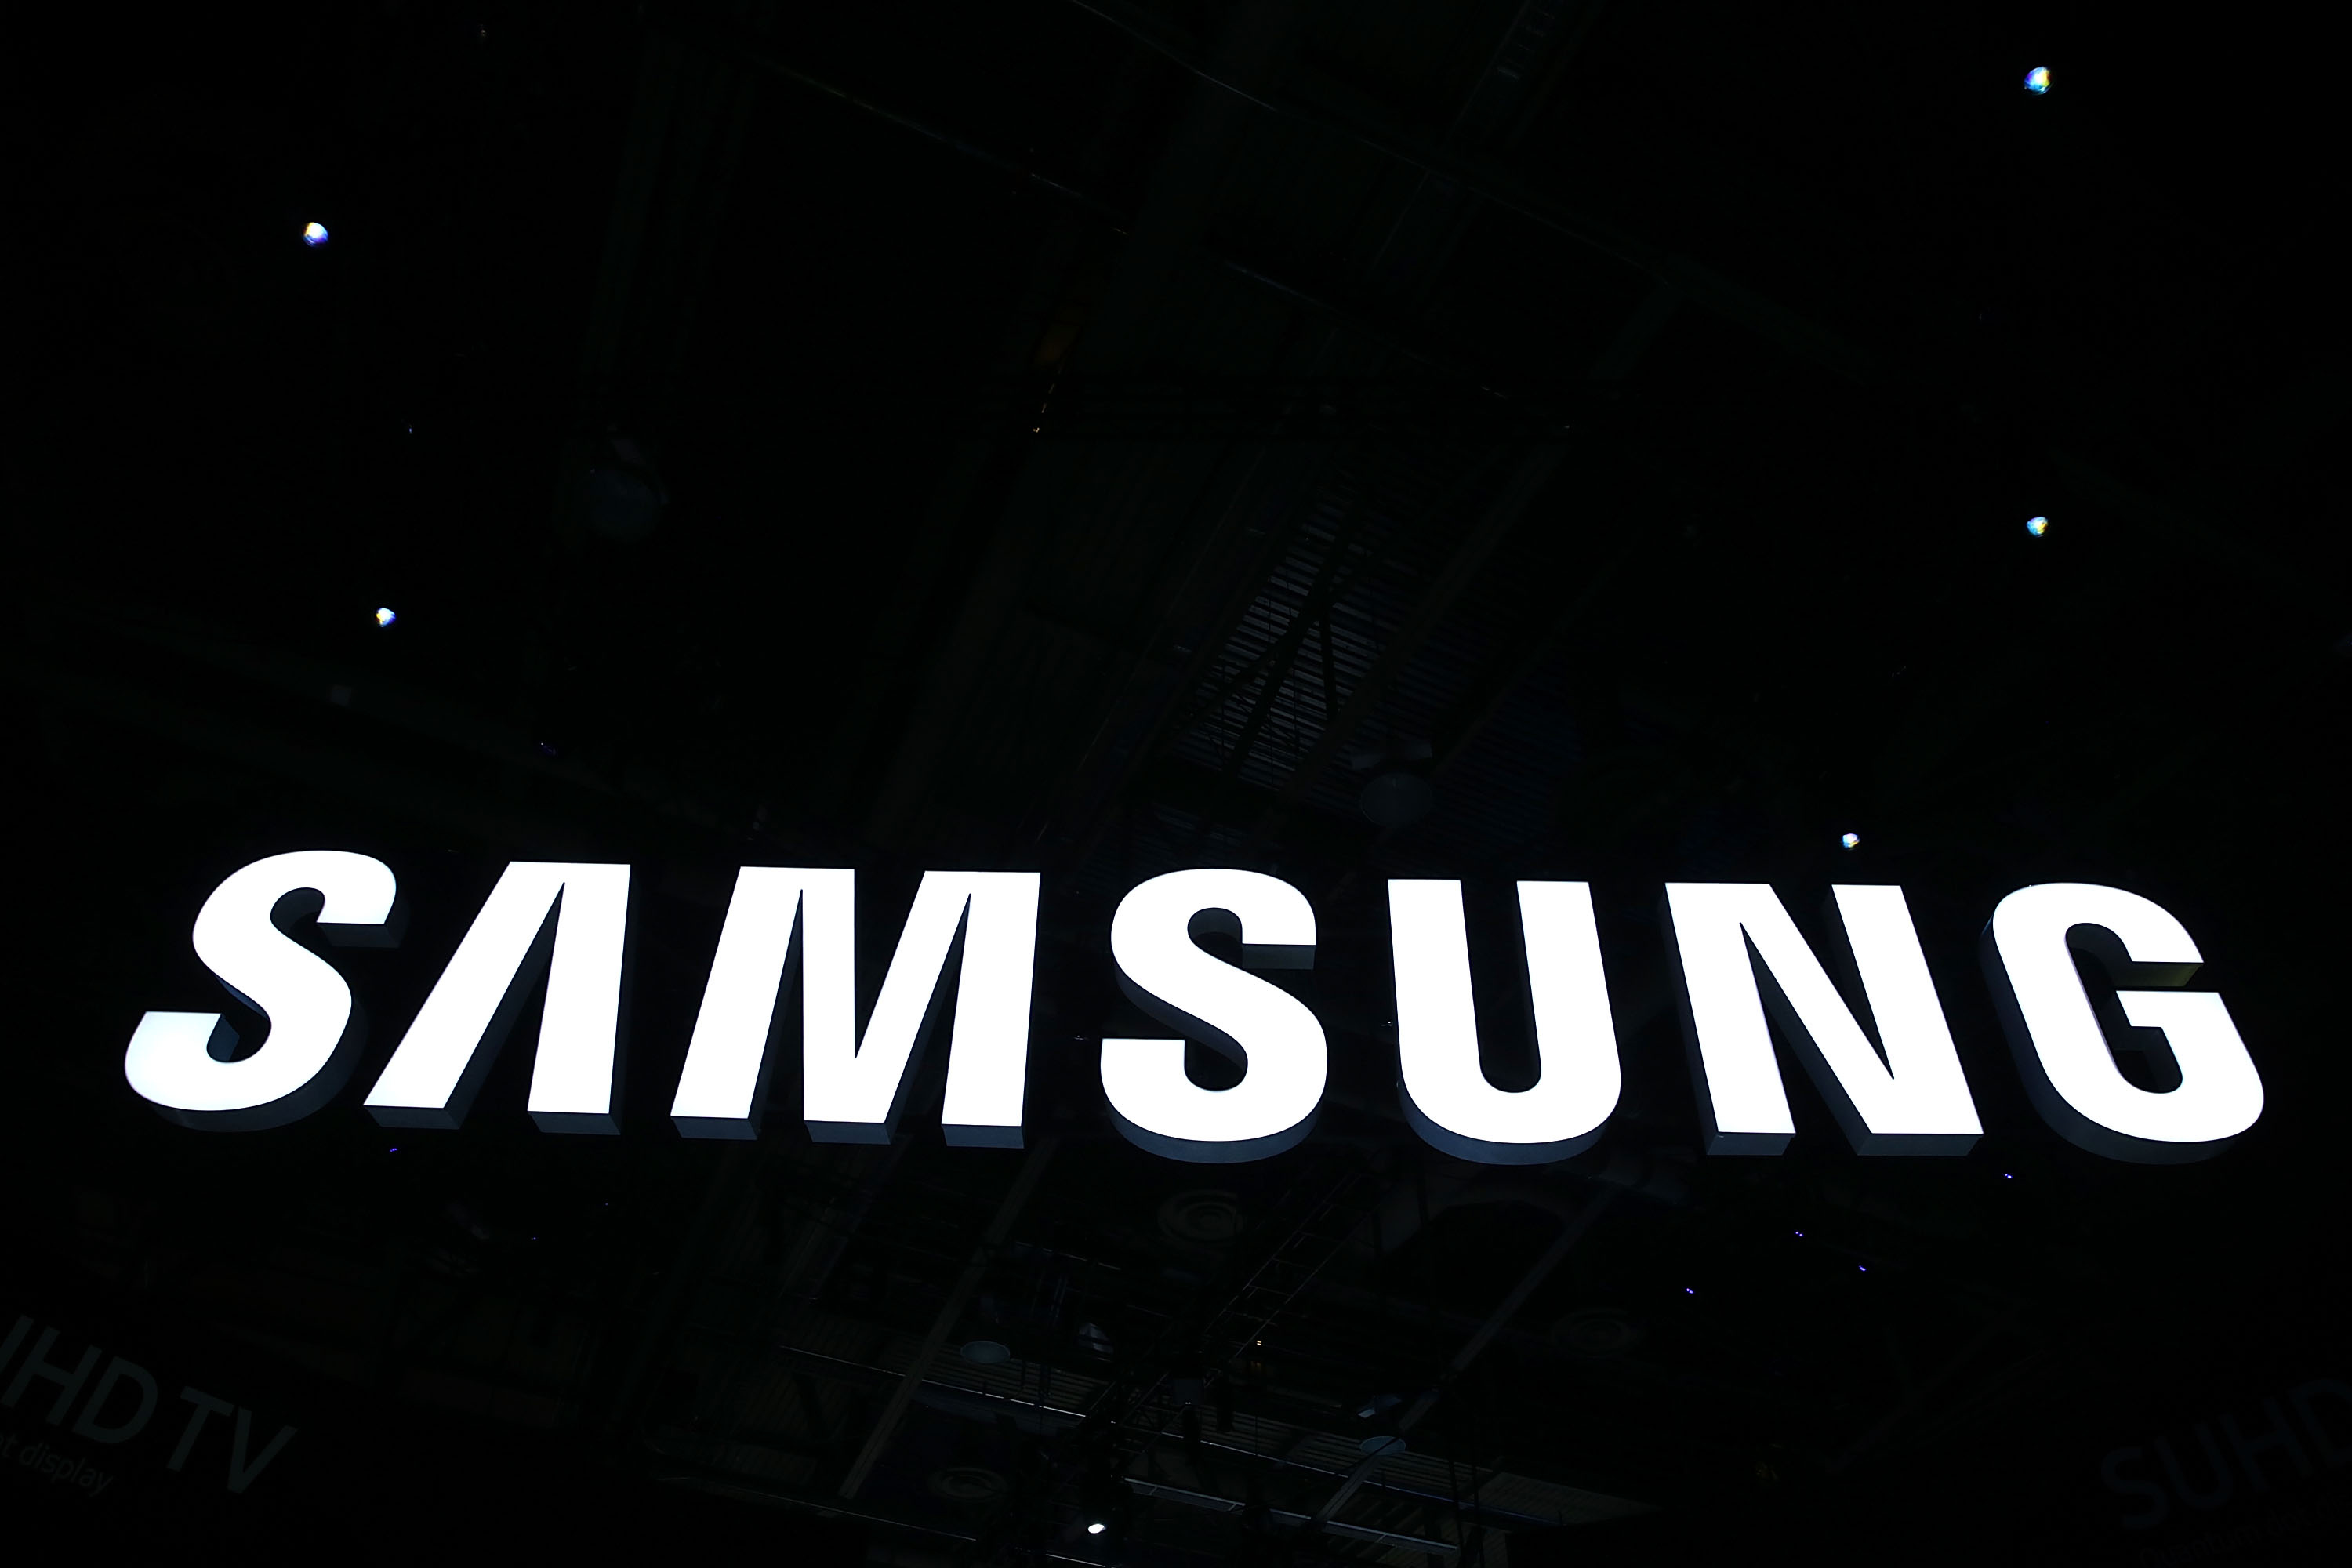 The Samsung logo is seen at CES 2016 at the Las Vegas Convention Center on January 6, 2016 in Las Vegas, Nevada. (Alex Wong/Getty Images)